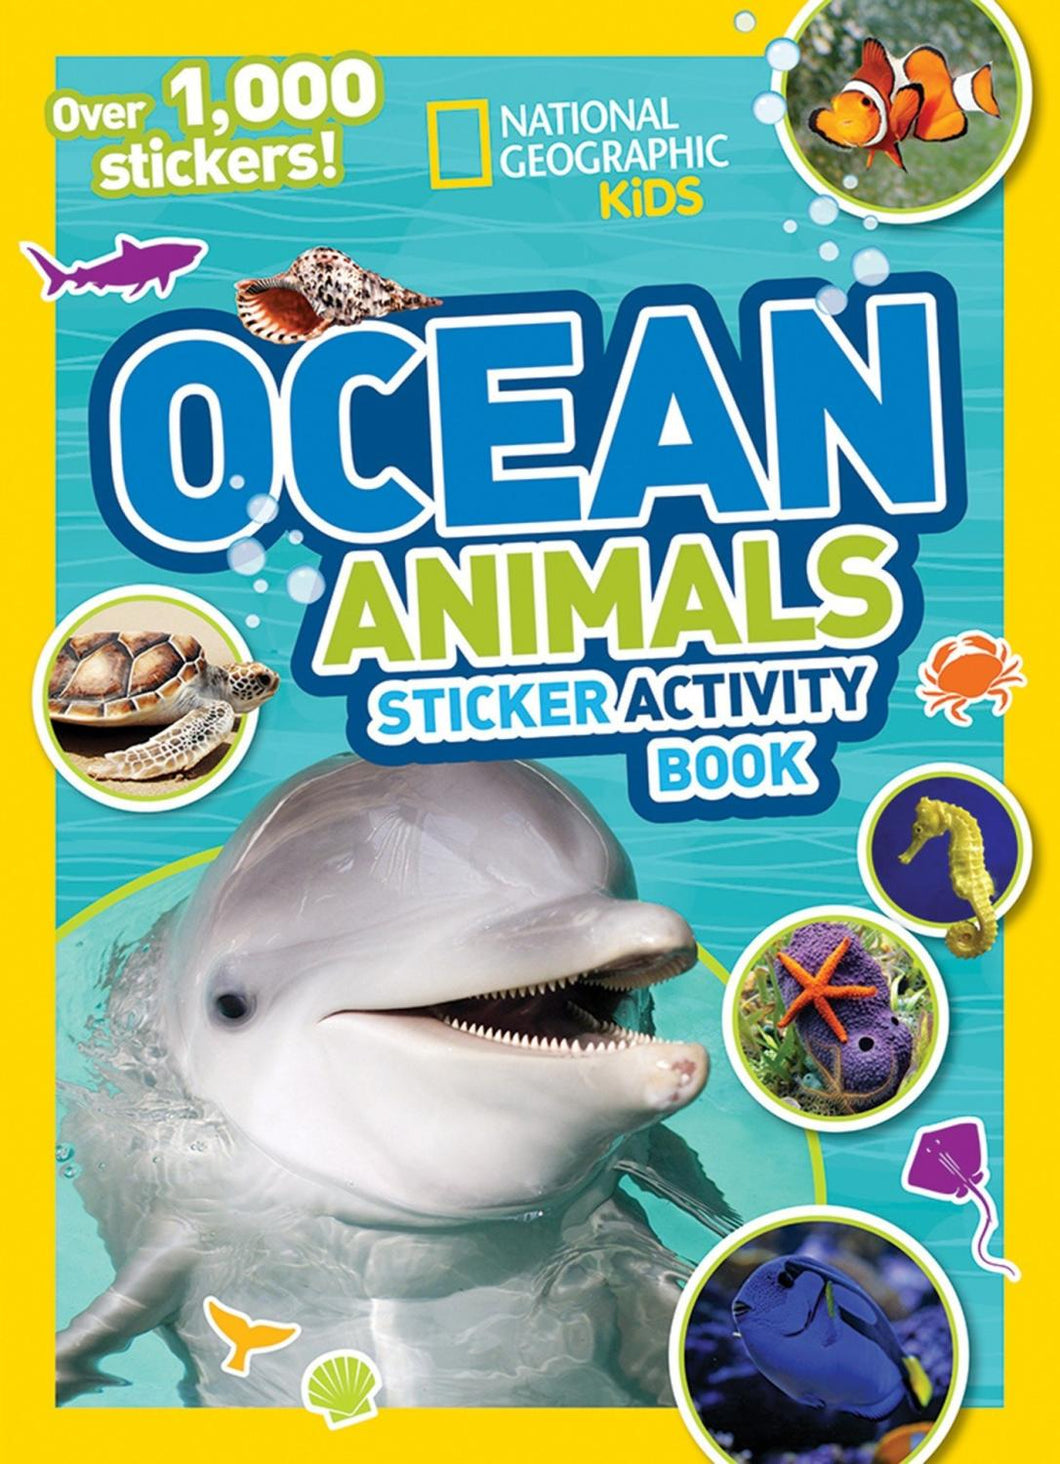 Ocean Animals Sticker Activity Book by National Geographic